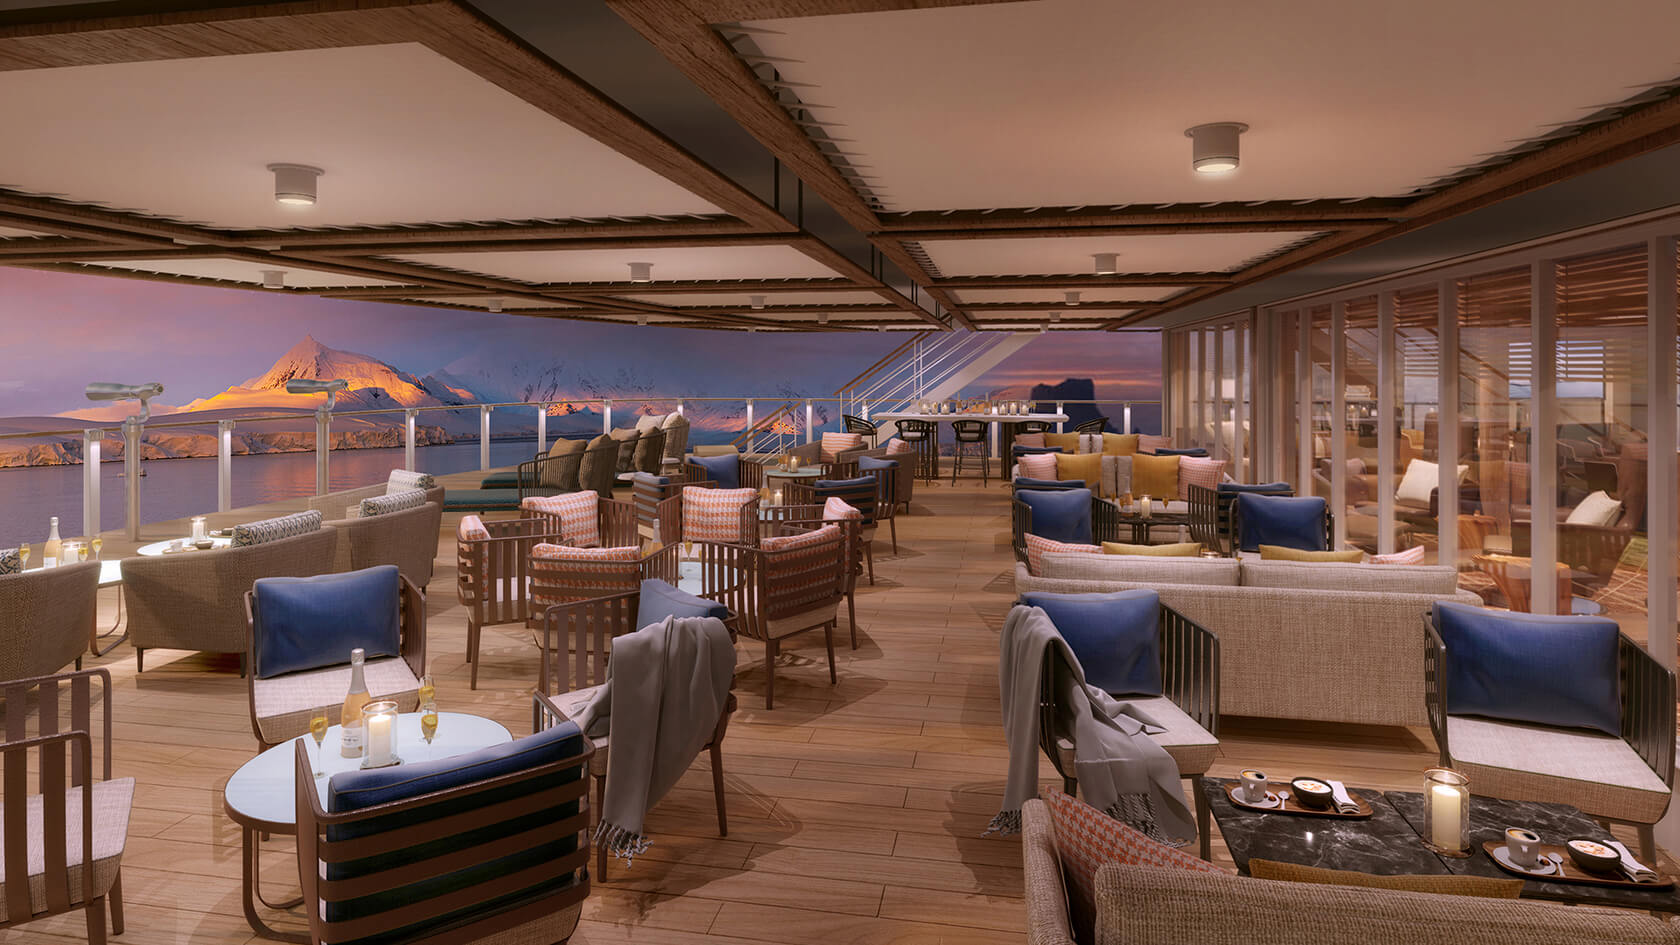 An Inside Look at the New "Seabourn Square"